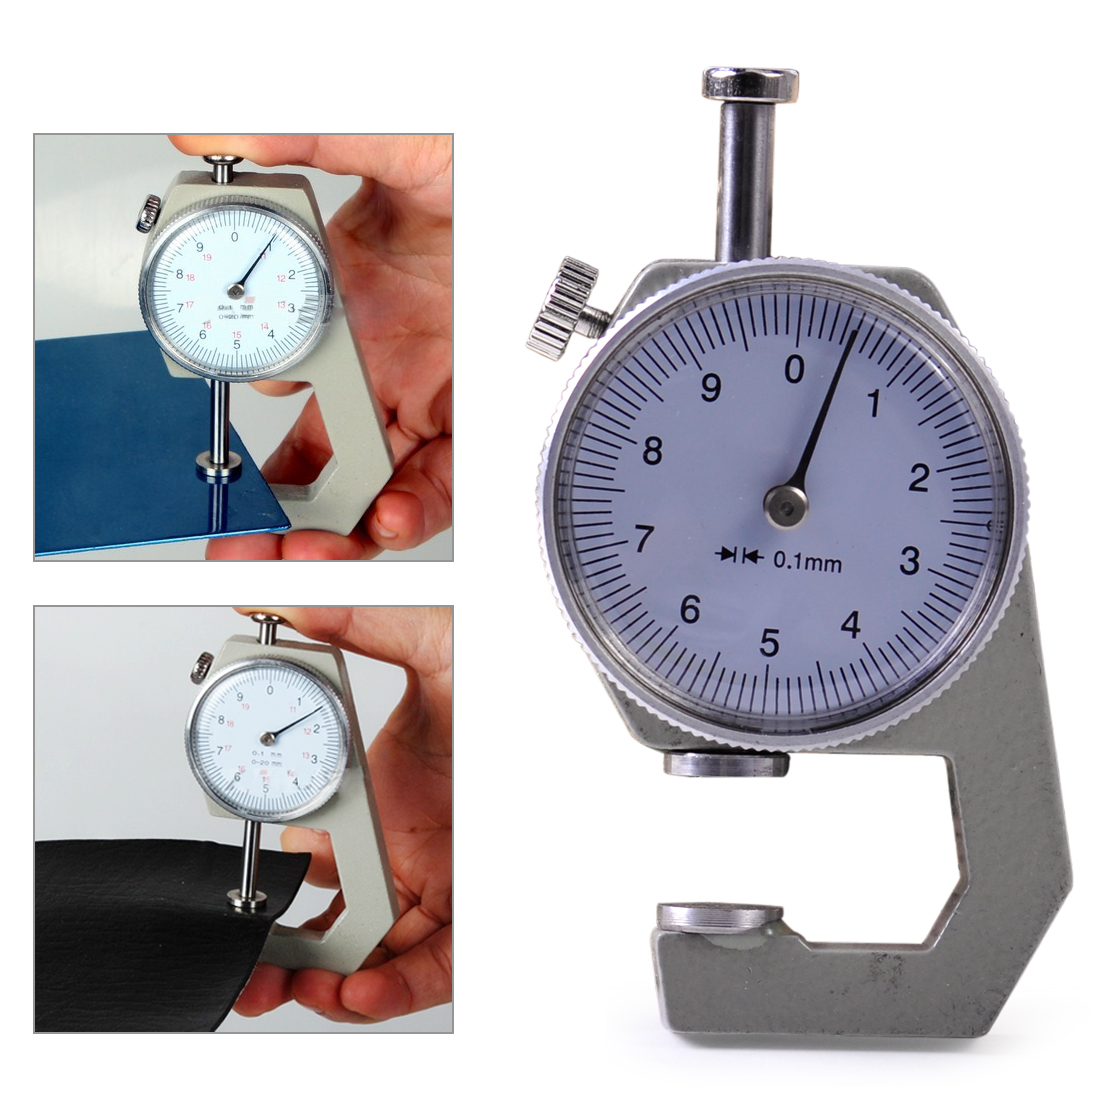 0 to 10mm Round Dial Thickness Gauge Gage Measurement Tool